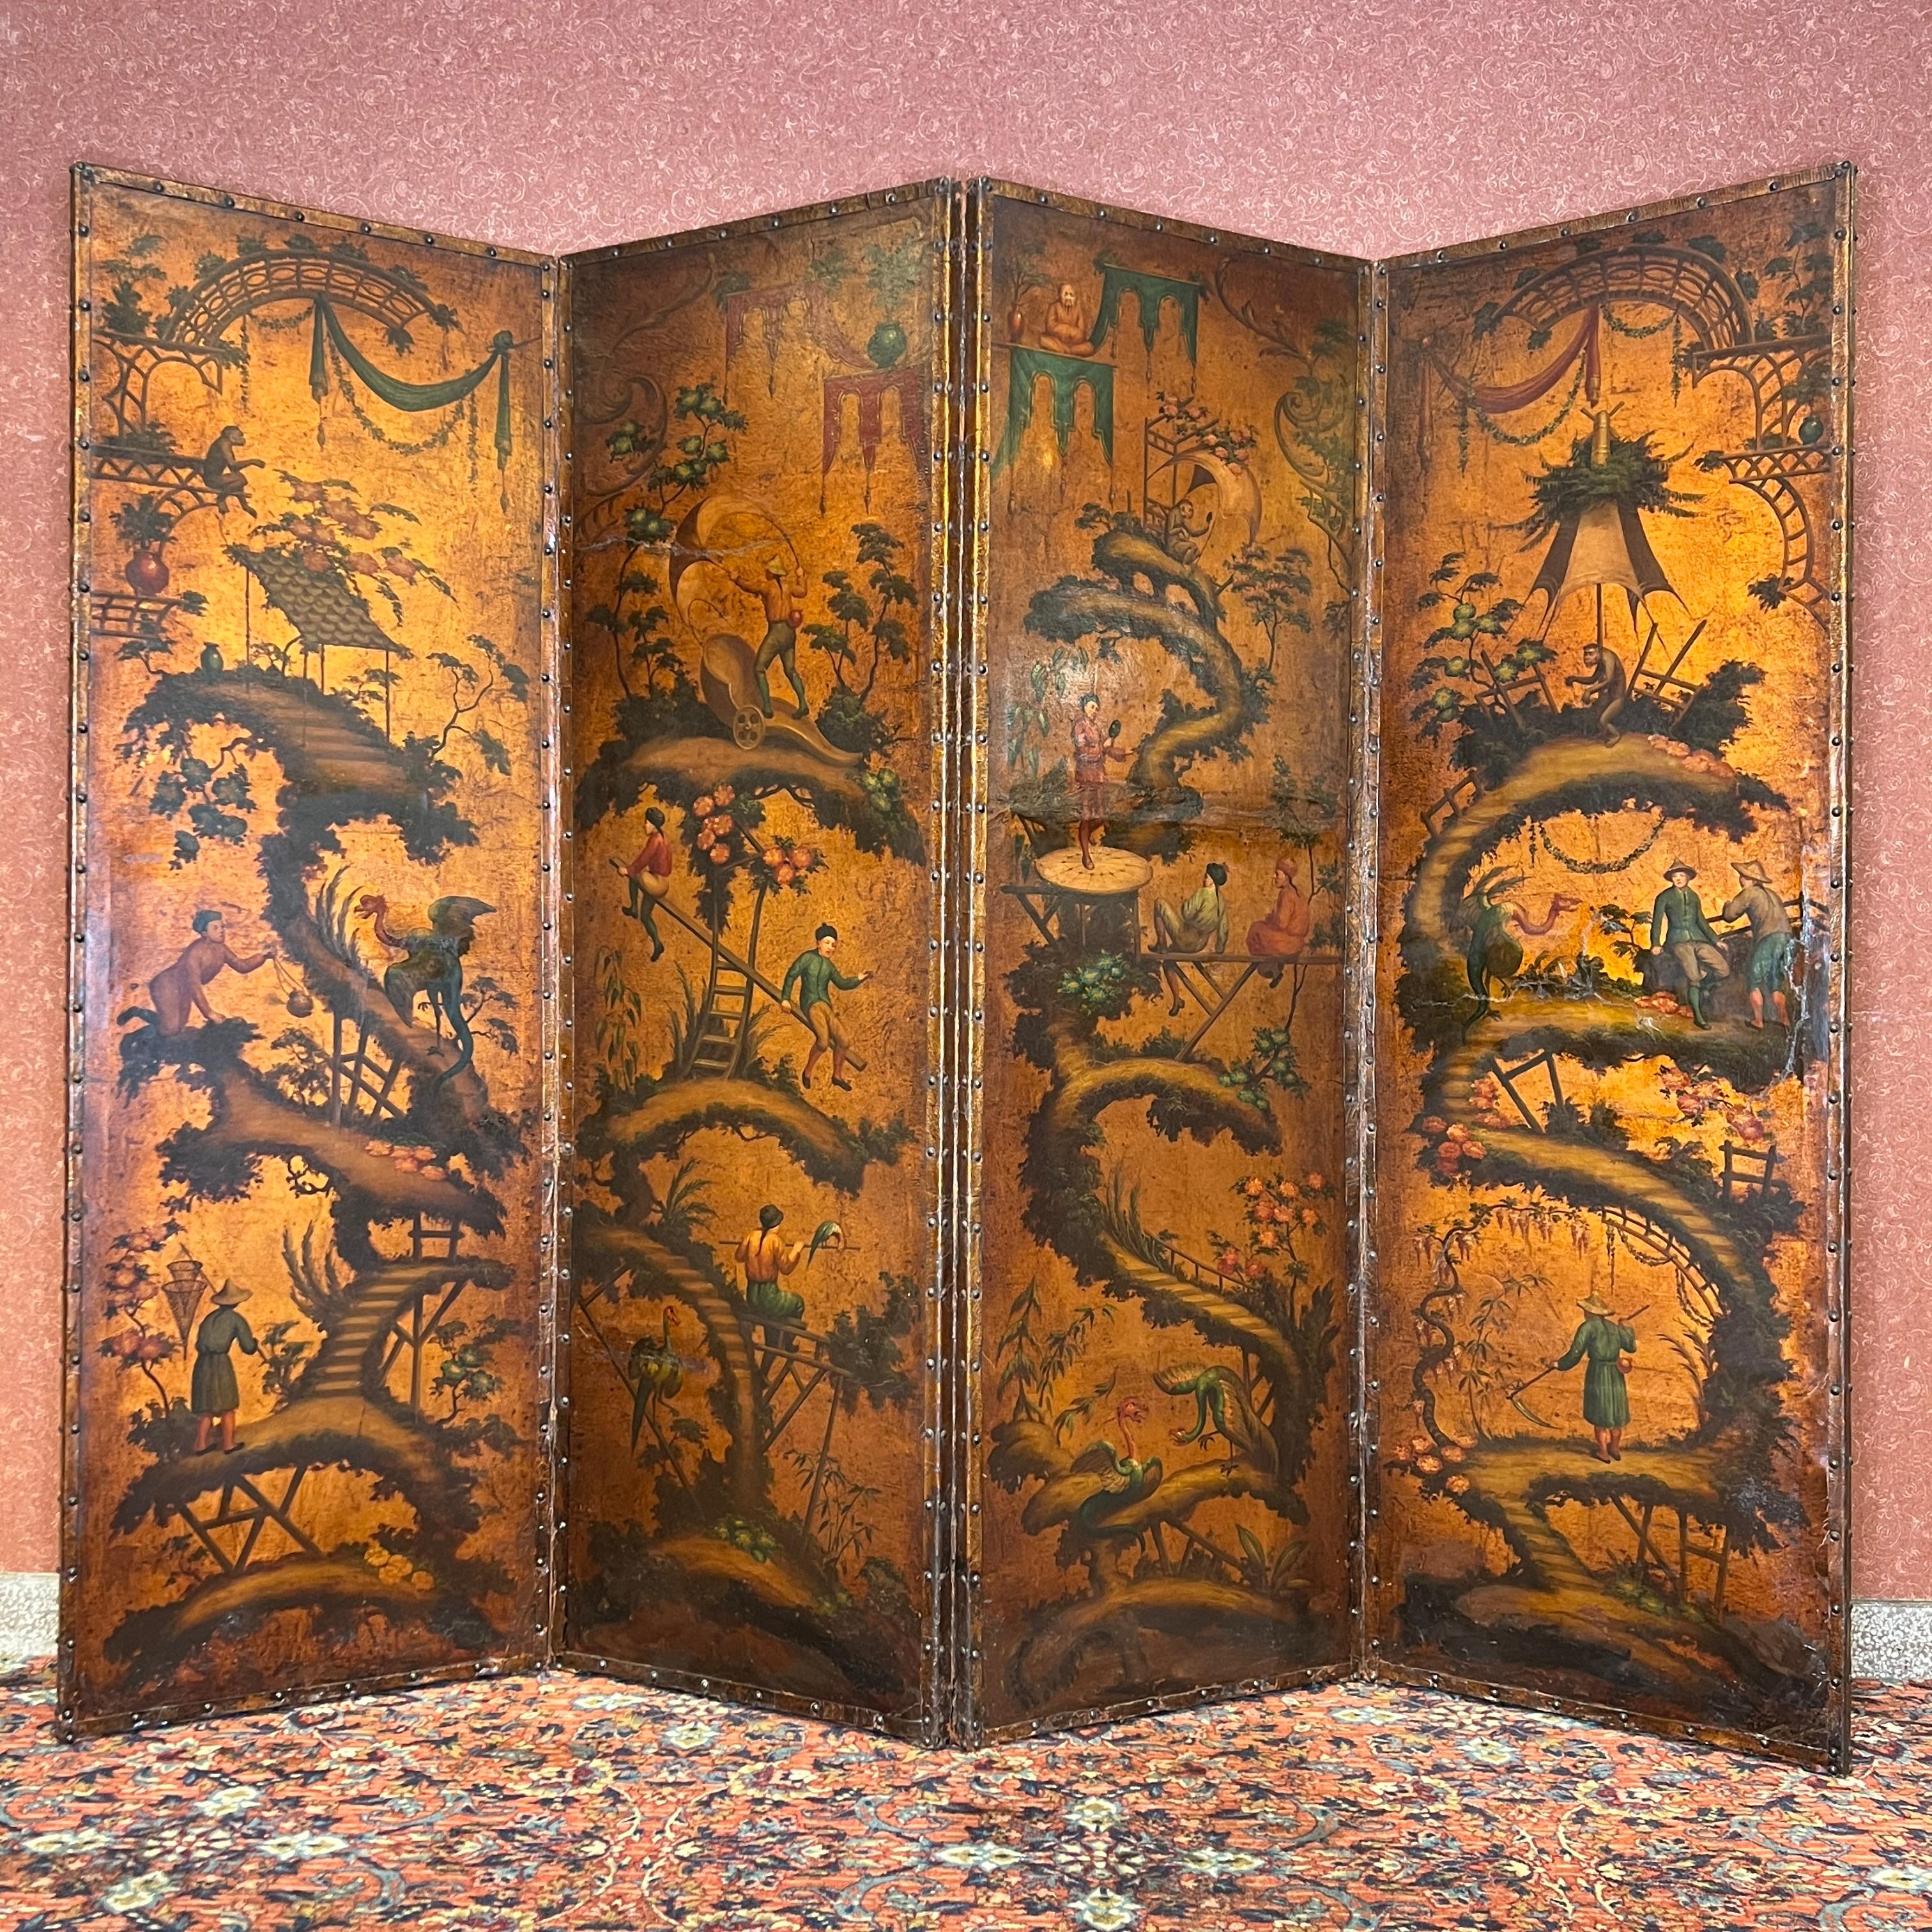 Very fine French turn of the century hand painted circa 1900 Chinoiserie 4 panel leather Screen with Monkeys.